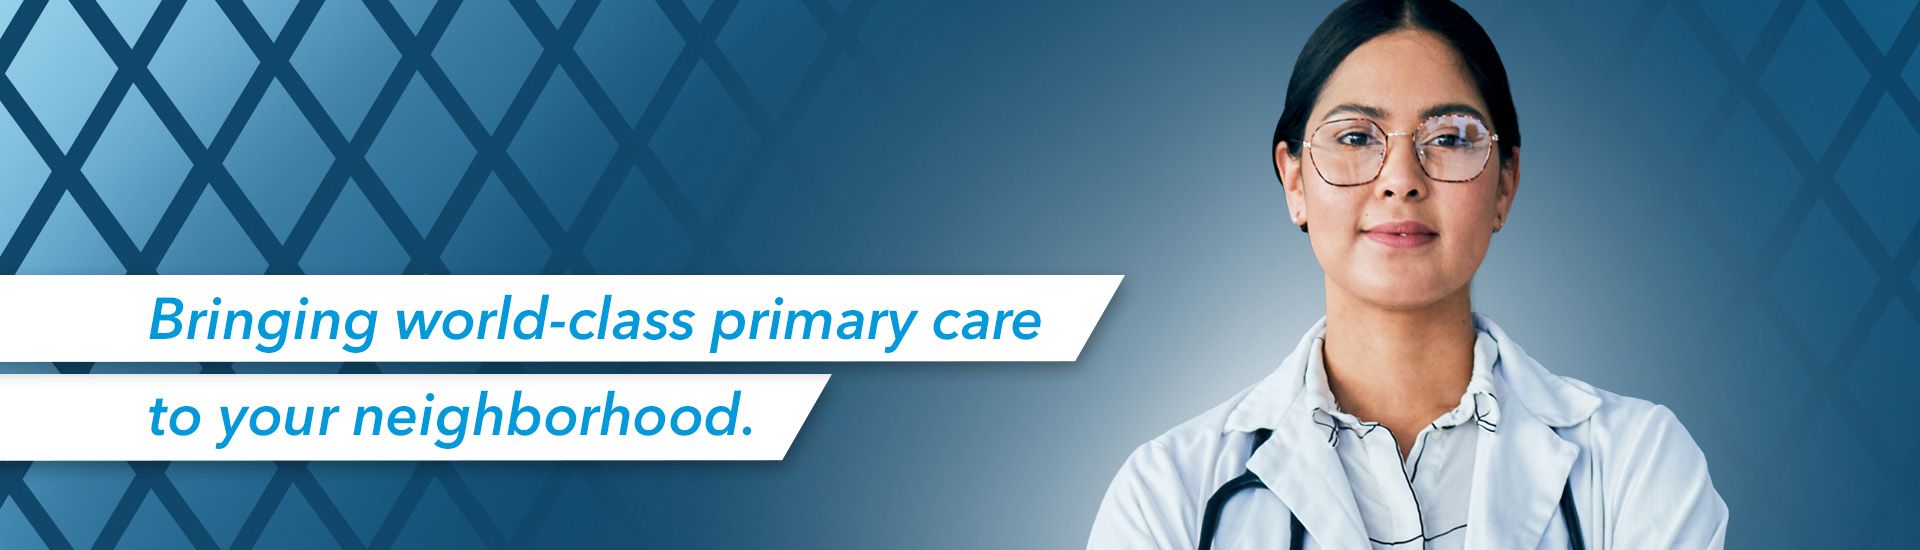 Bringing World-Class Primary Care to Your Neighborhood